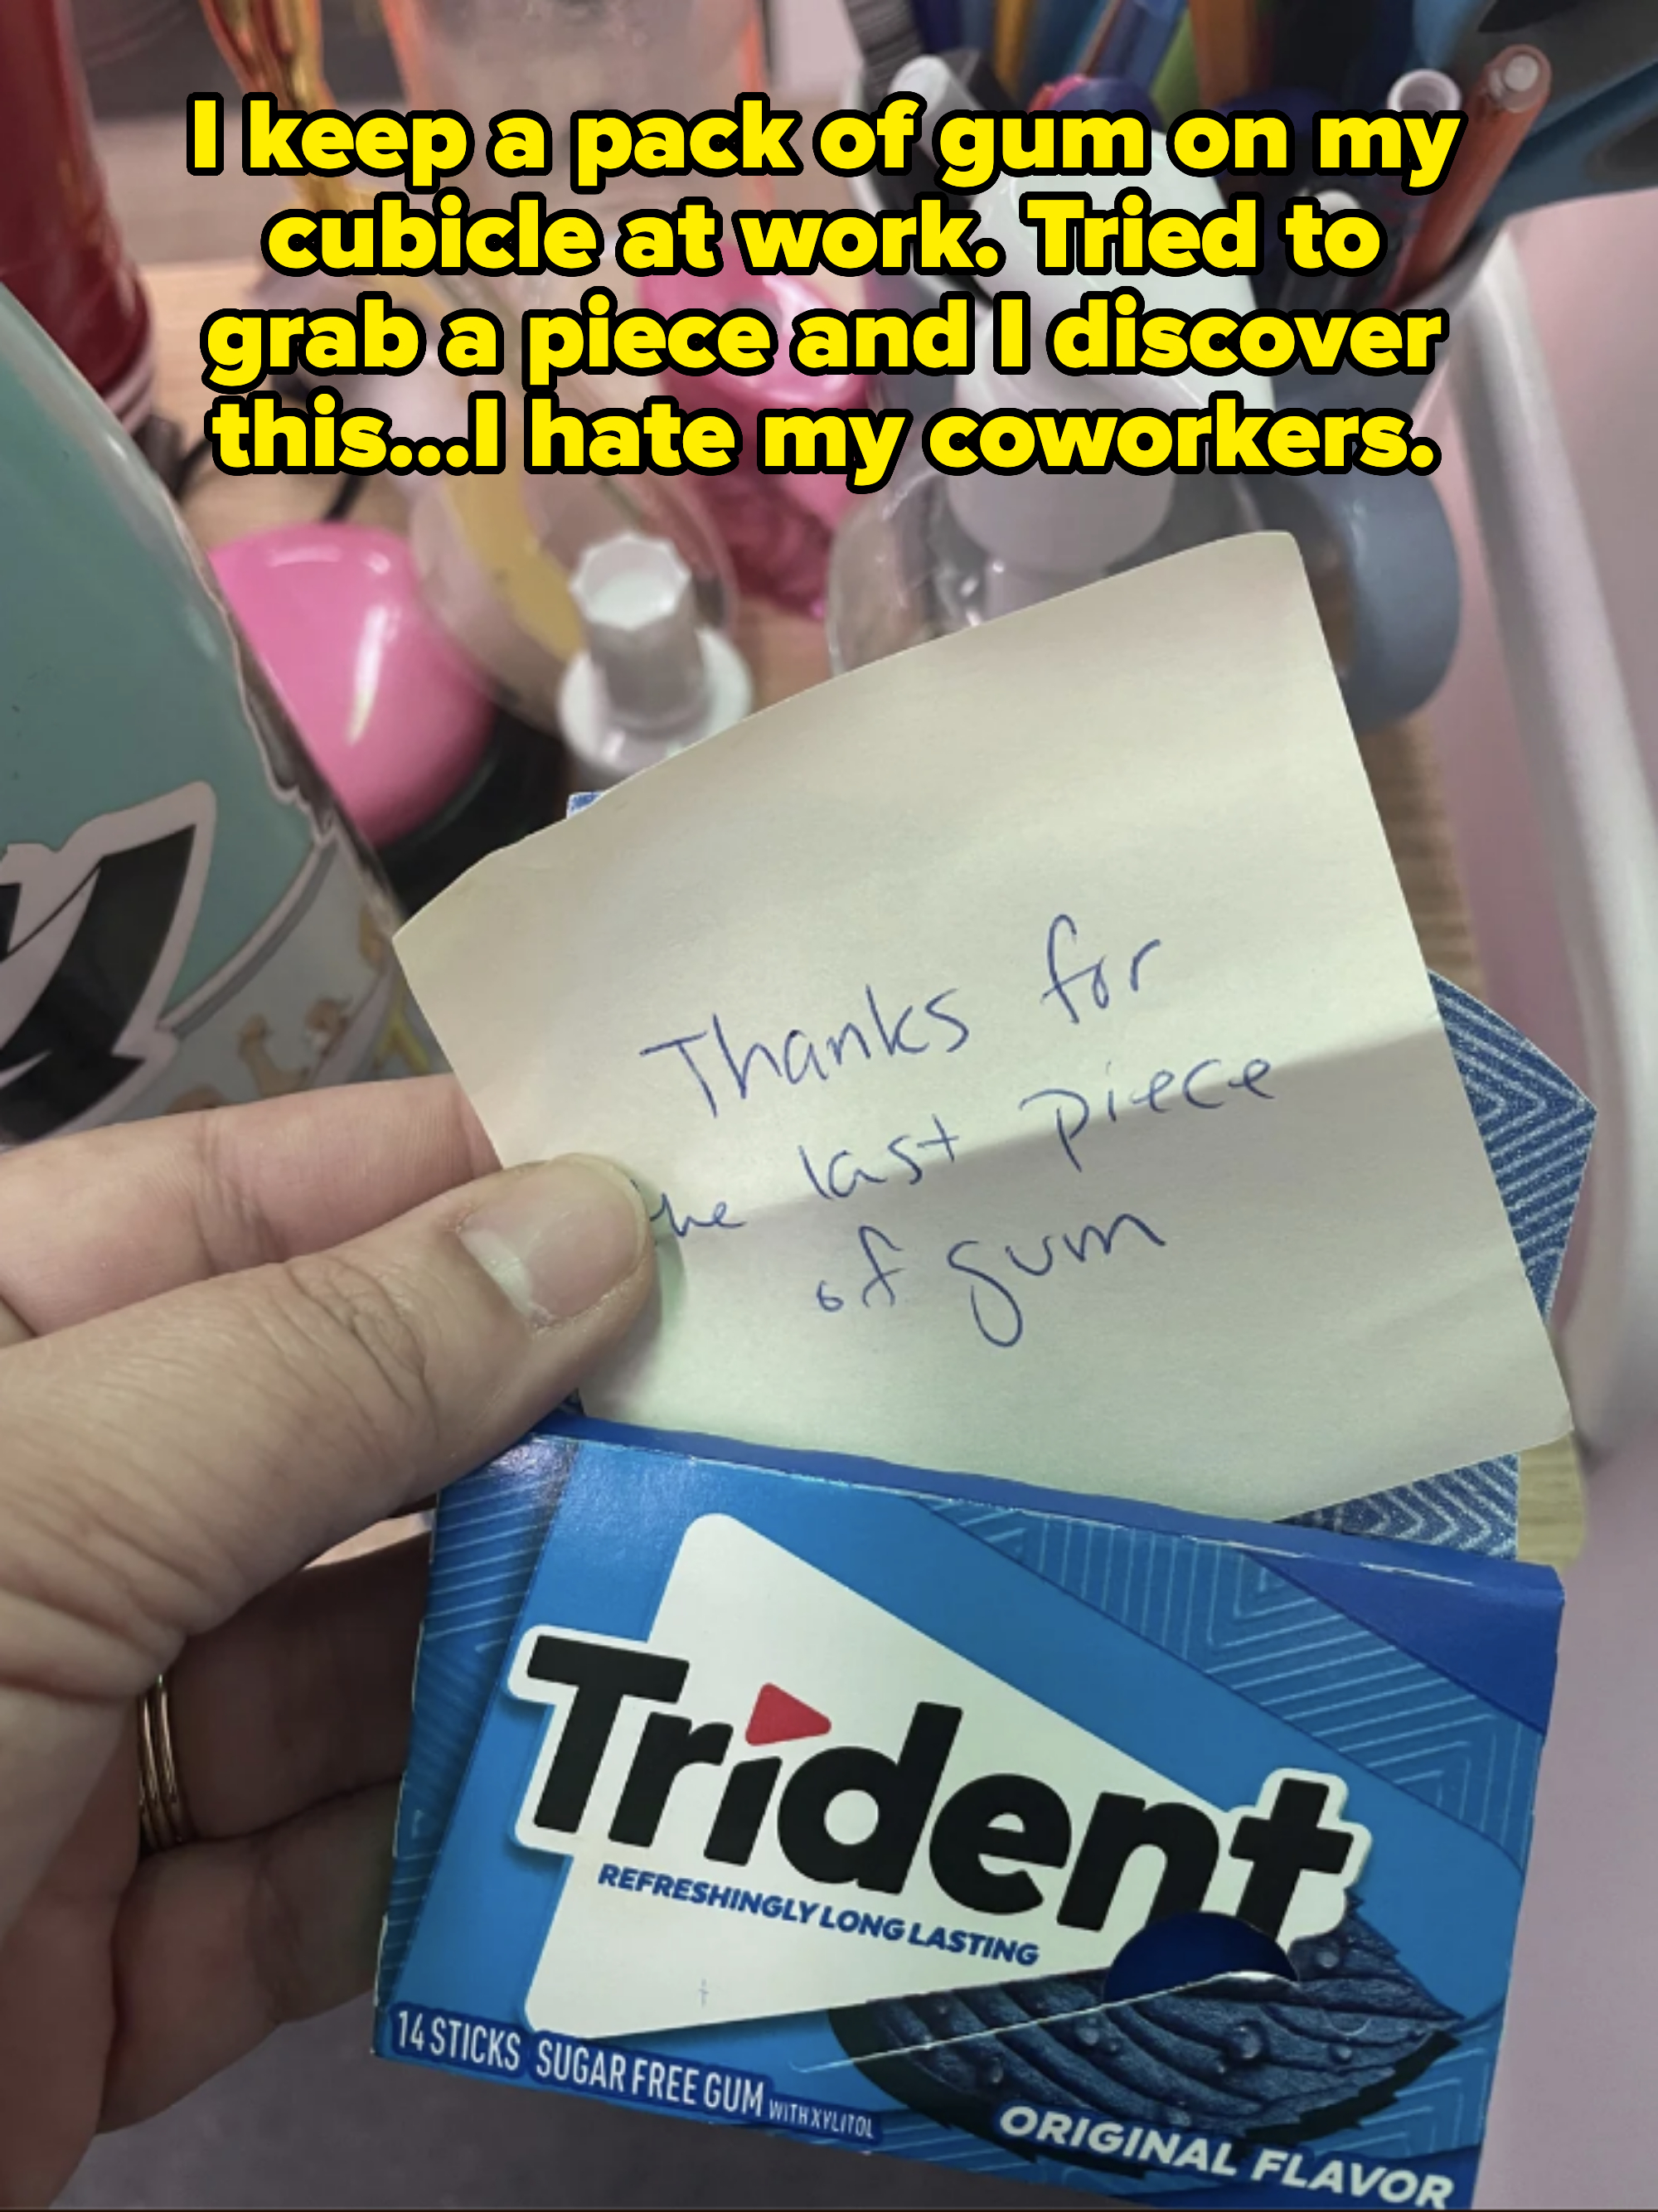 A note saying &quot;Thanks for the last piece of gum&quot; placed on a Trident gum pack, surrounded by office supplies